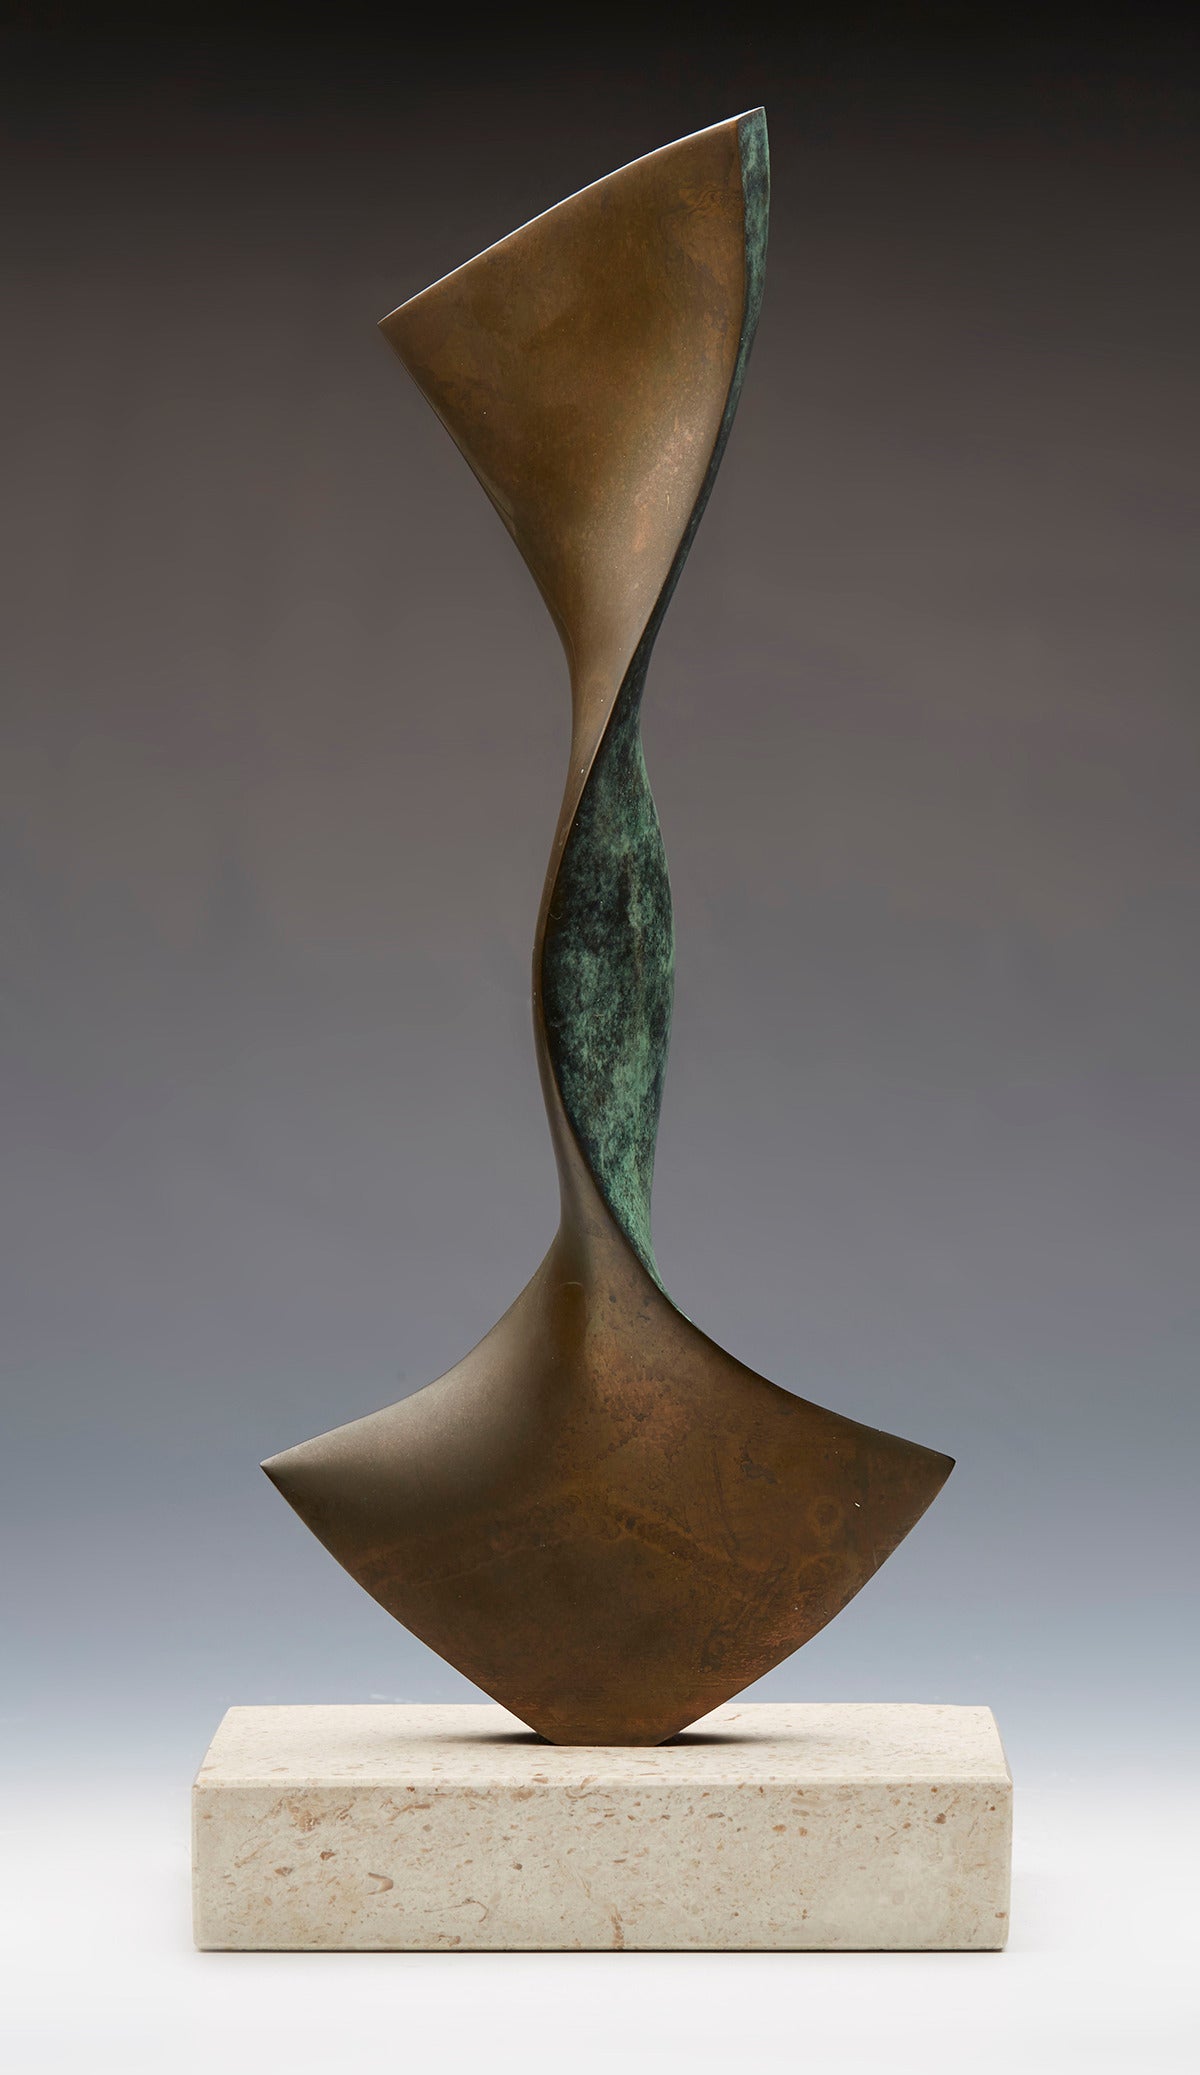 A stylish modernist bronze sculpture in the manner of Barbara Hepworth formed as a standing stylised twisted anchor design with one side applied with a green patination while the other with a polished bronze finish and mounted on a white